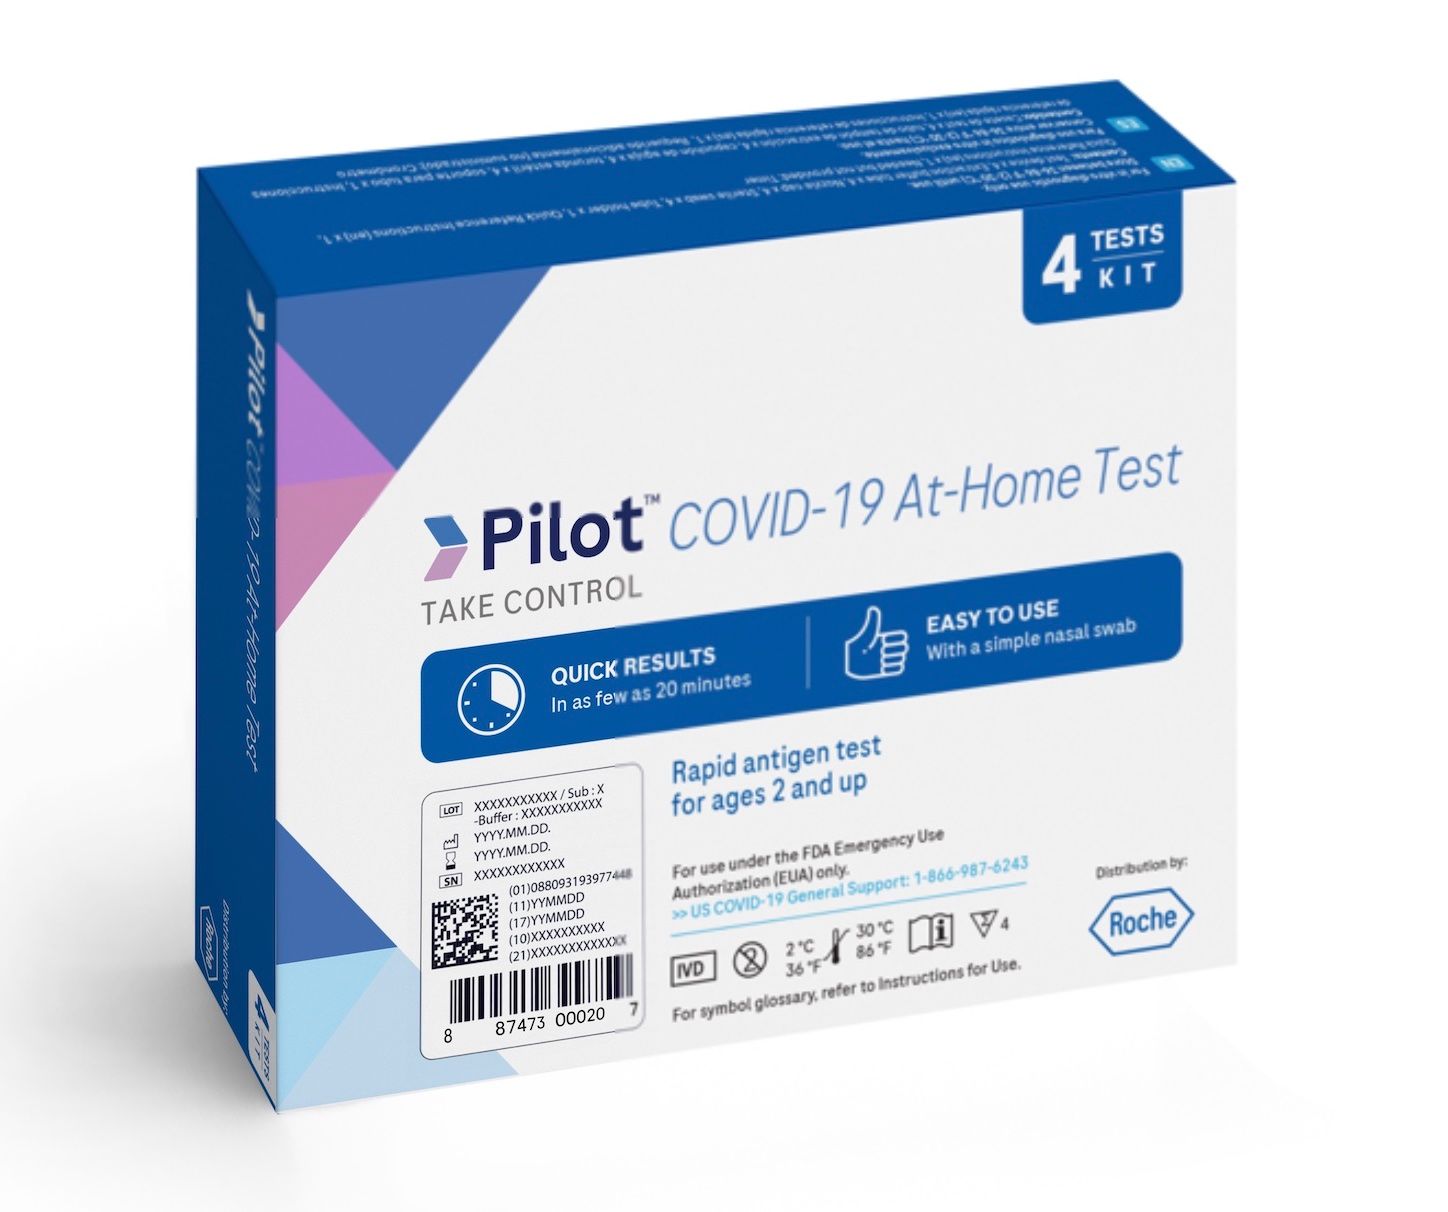 DISCLimited Inventory: Pilot COVID-19 At-Home Test distributed by Roche, 4 tests